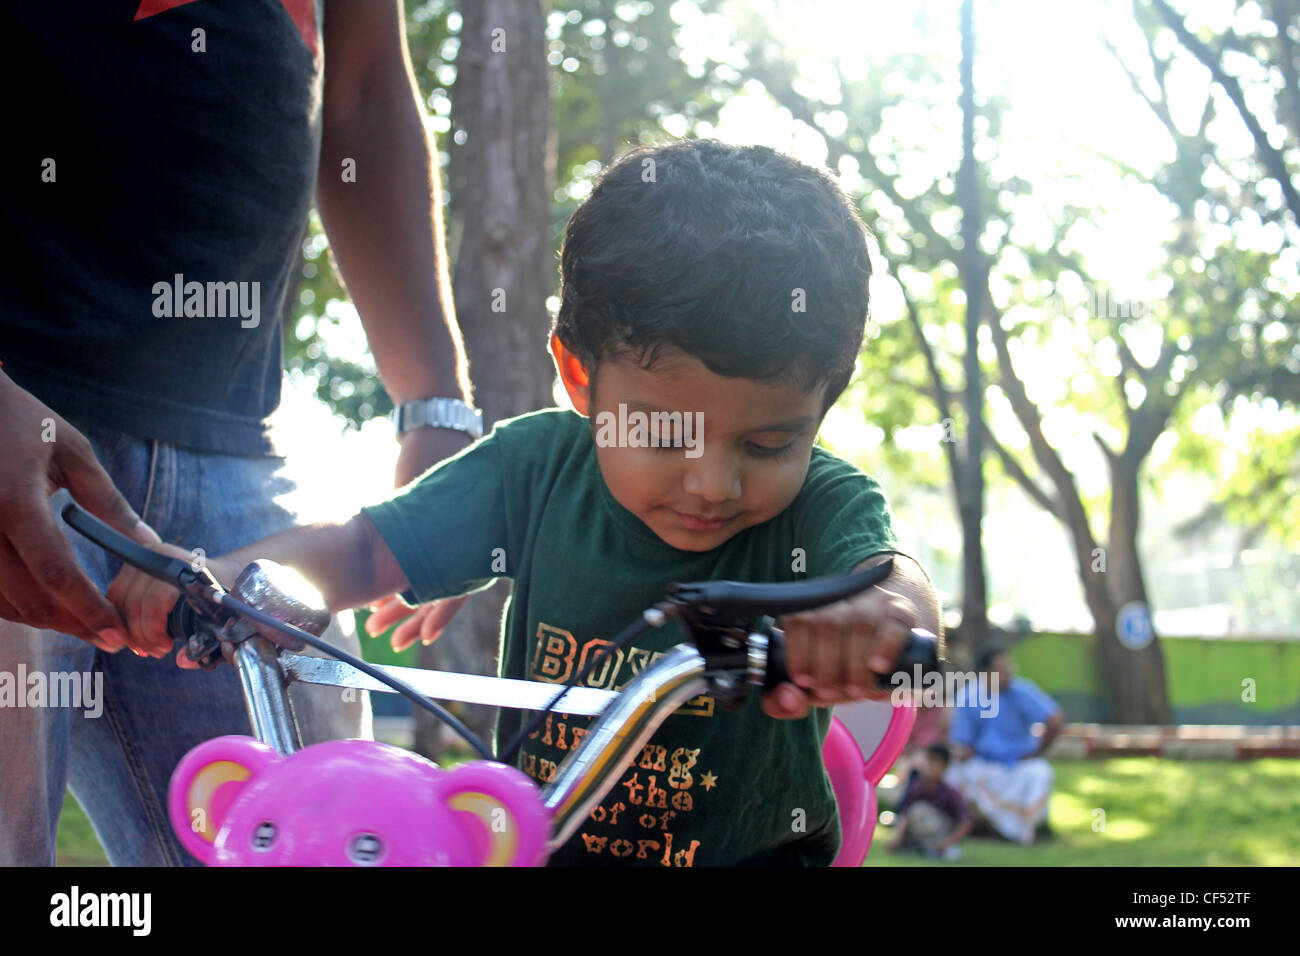 3 year old asian boy cycling Stock Photo